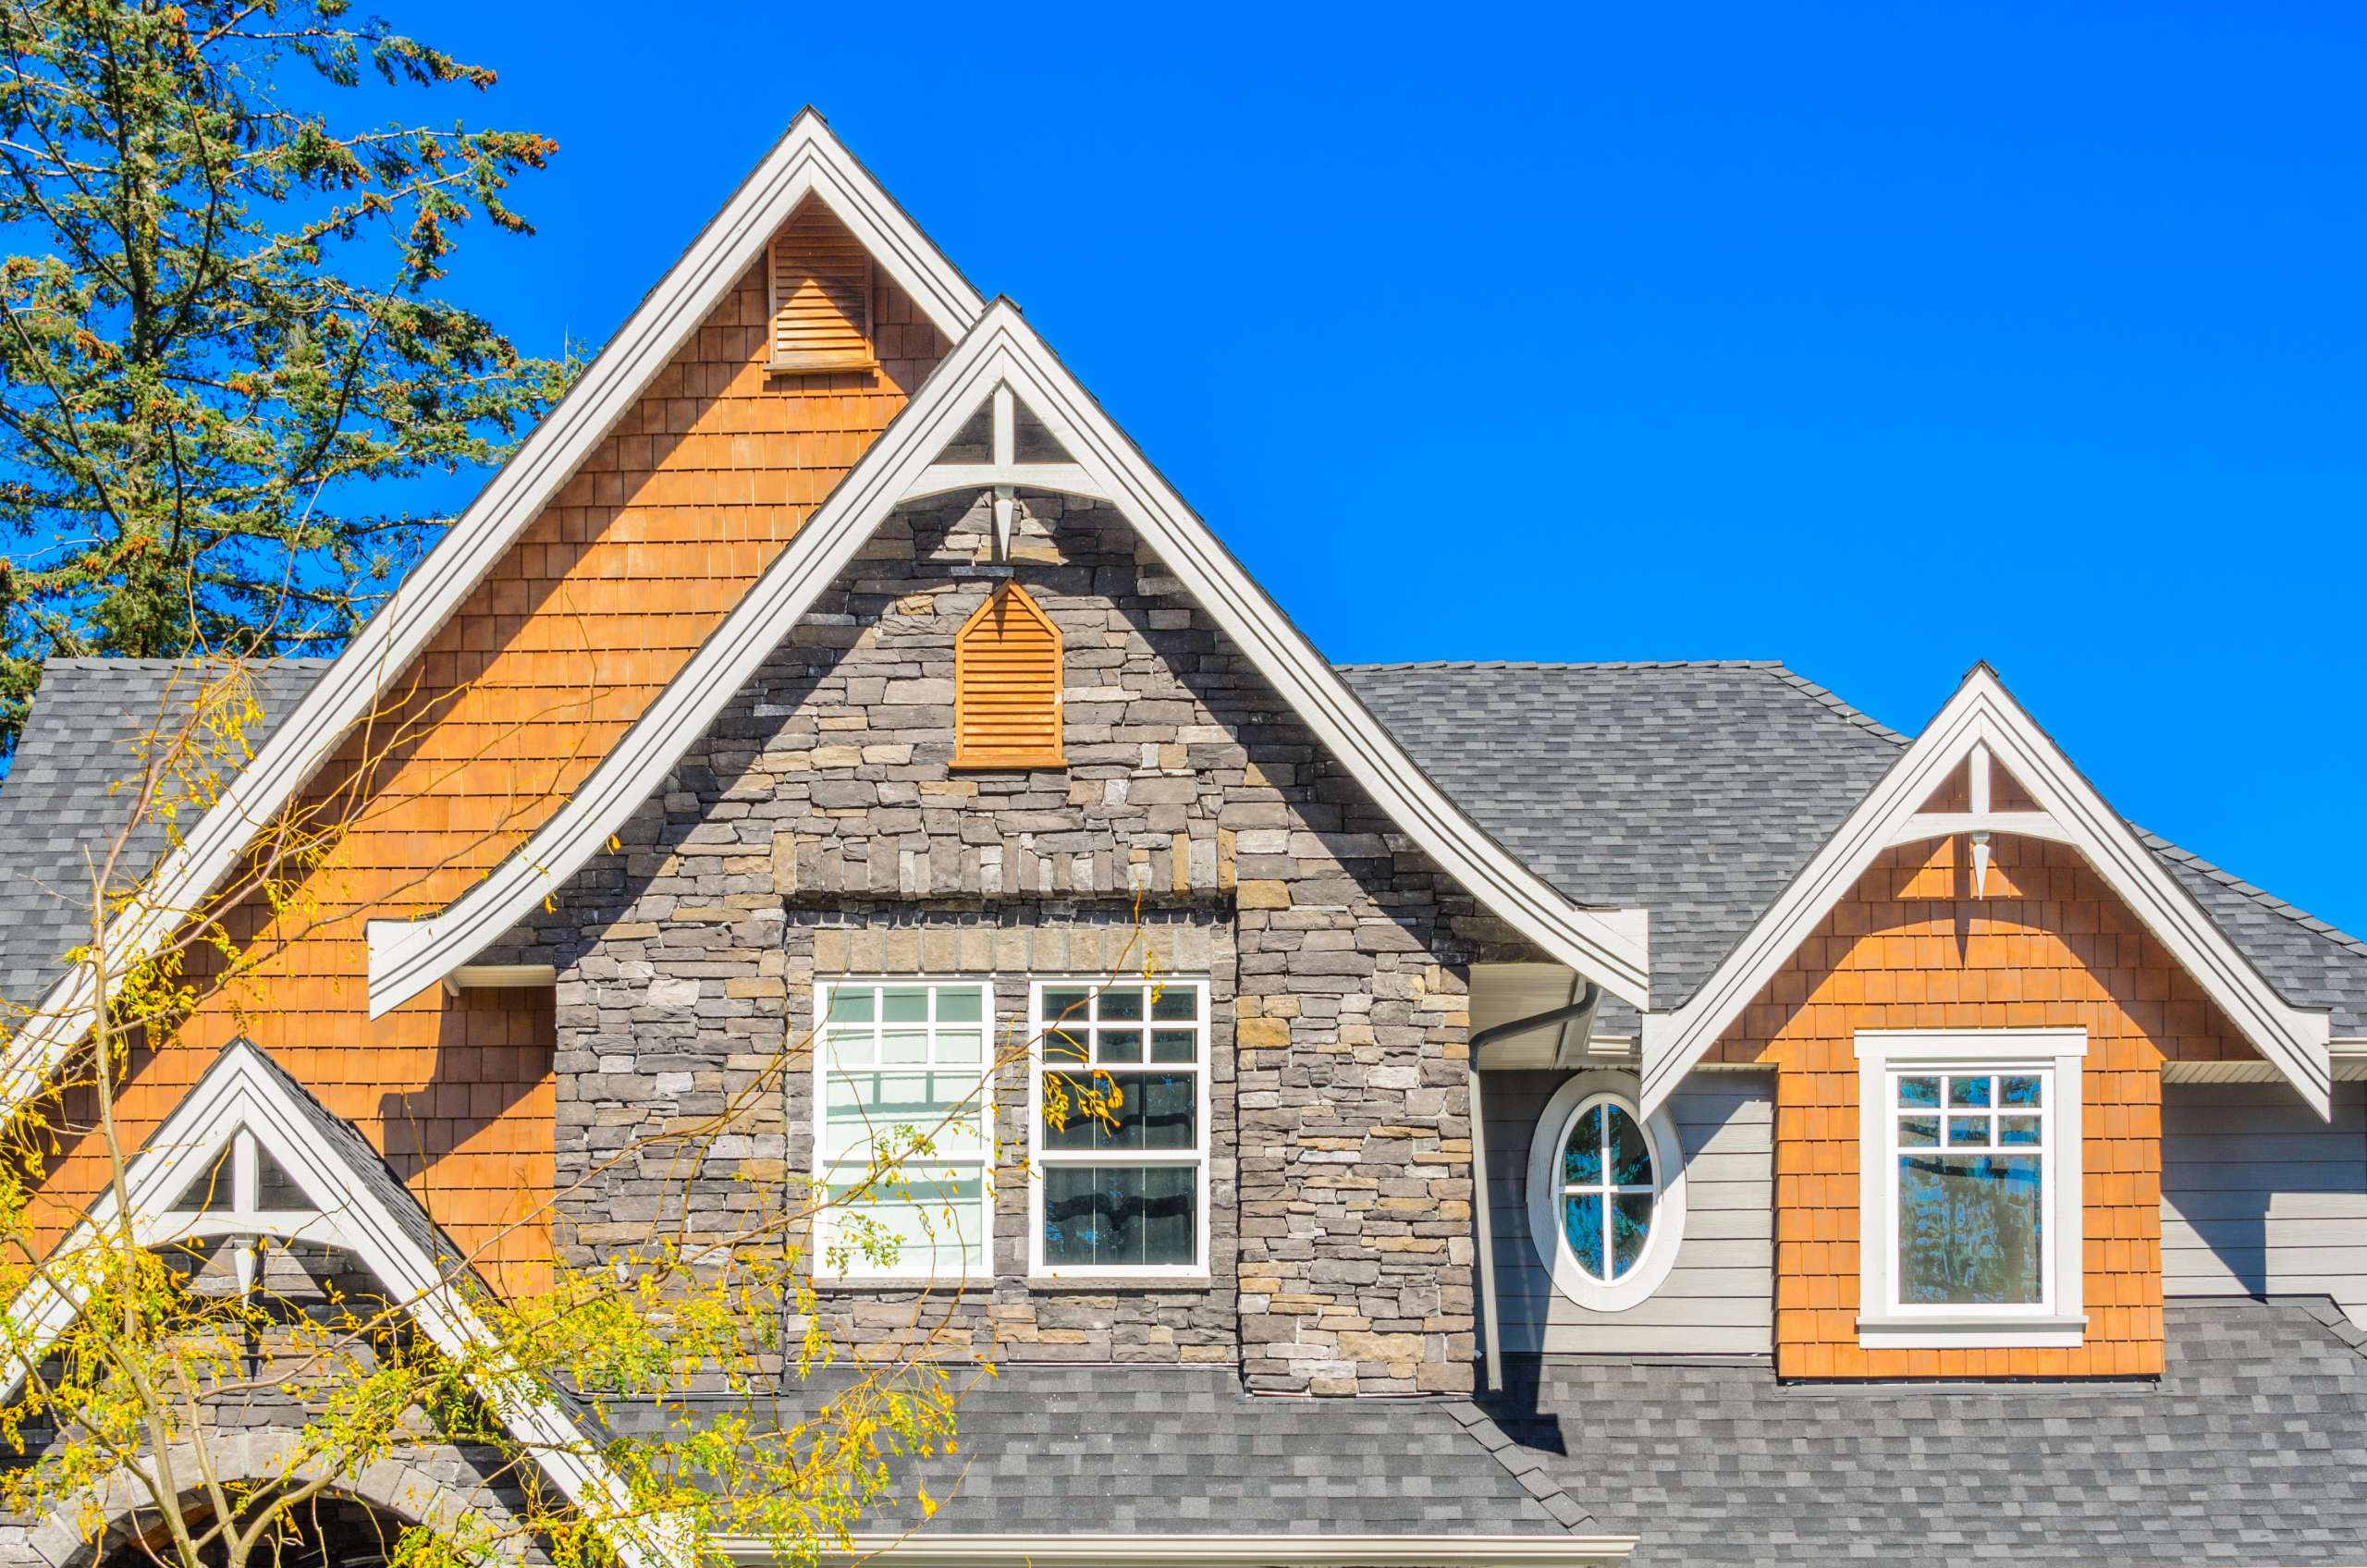 Give Your Roof A Second Chance At a Long Life With Expert Roof Repair Services